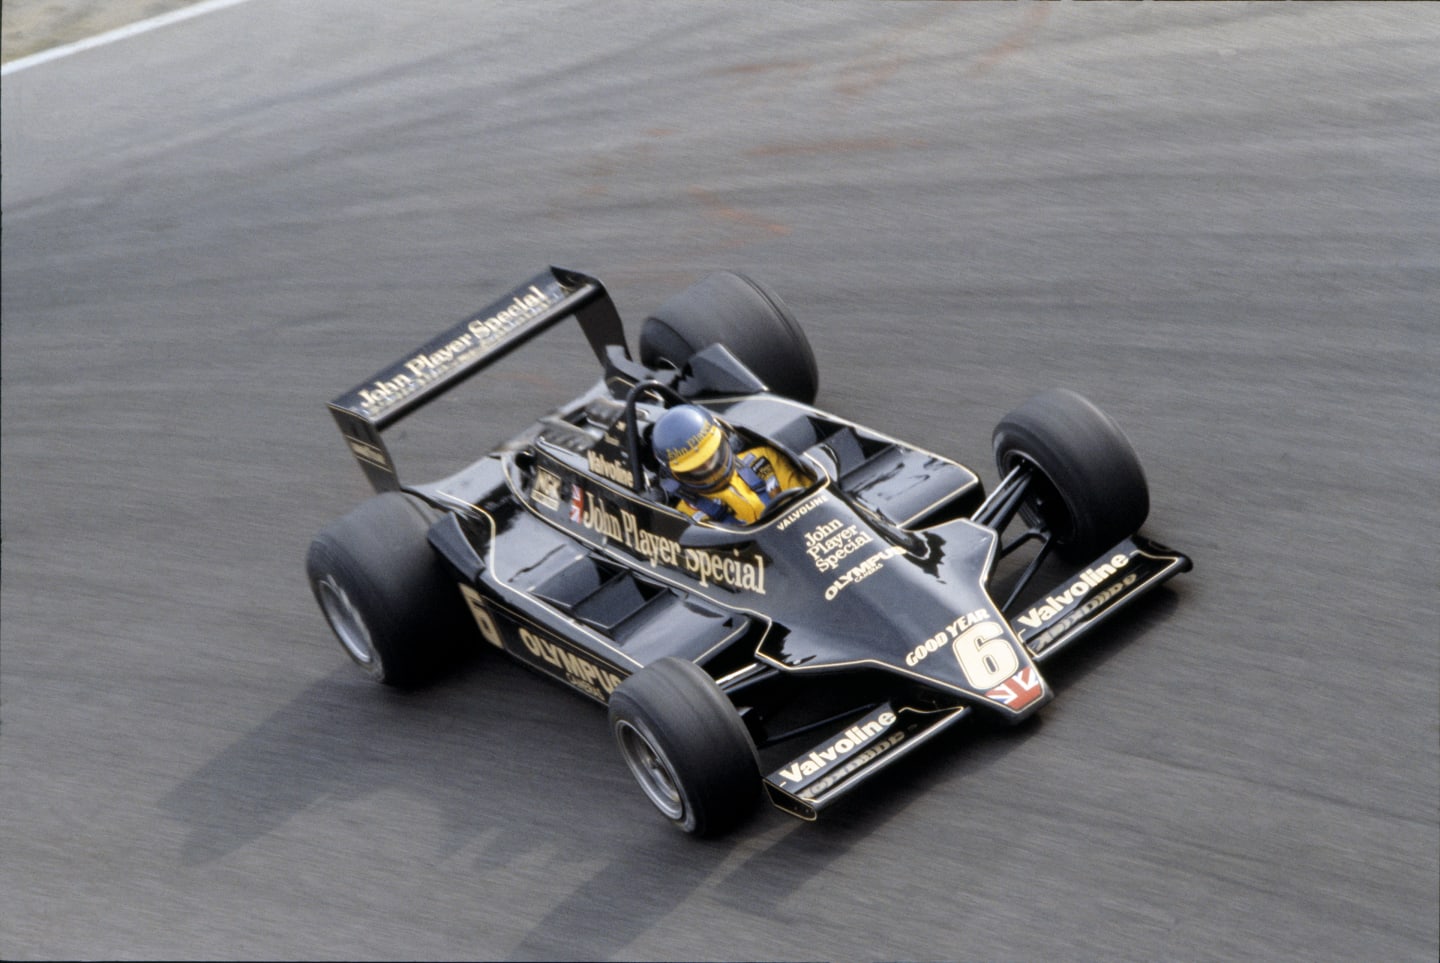 Monza, Italy, 8-10 September 1978.
Ronnie Peterson (Lotus 79-Ford), he was tragically killed in a